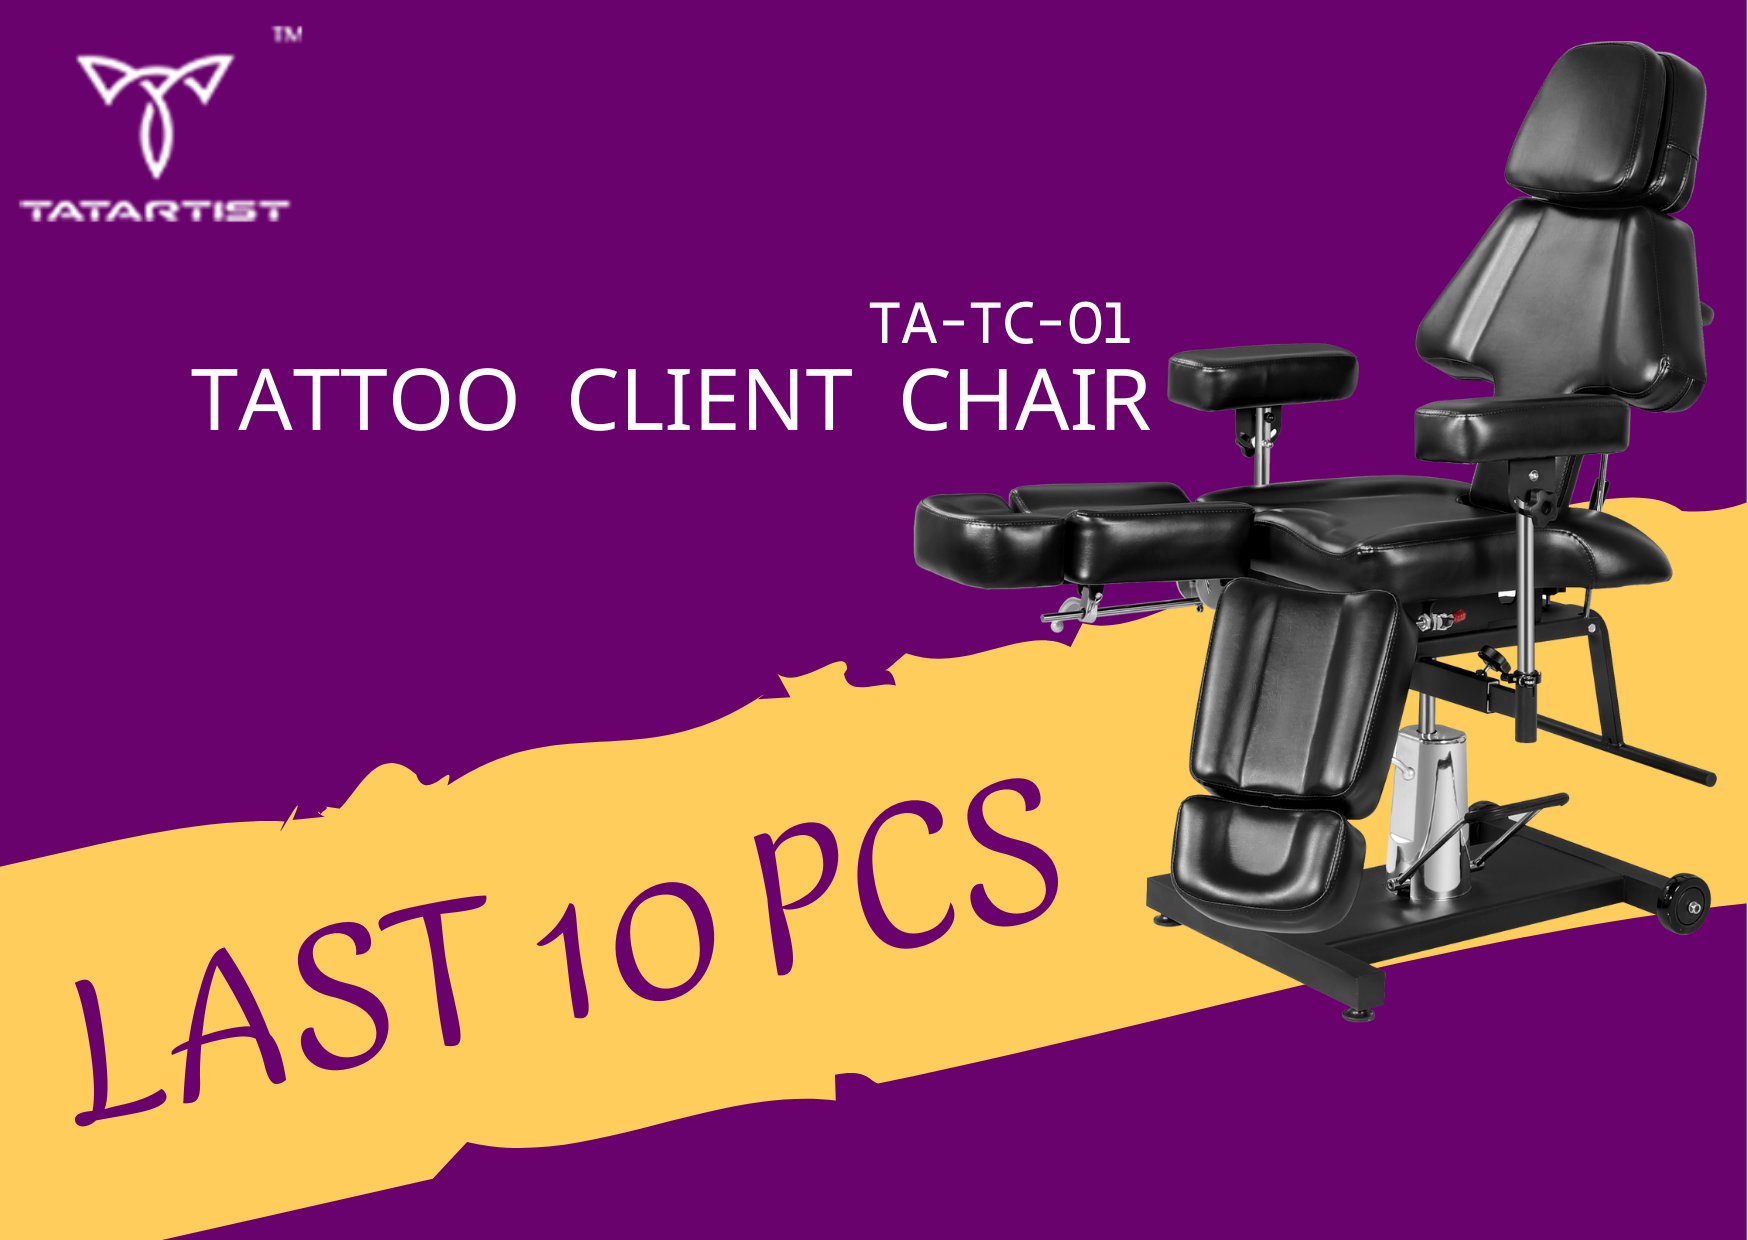 The last 10 tattoo client chairs ! !